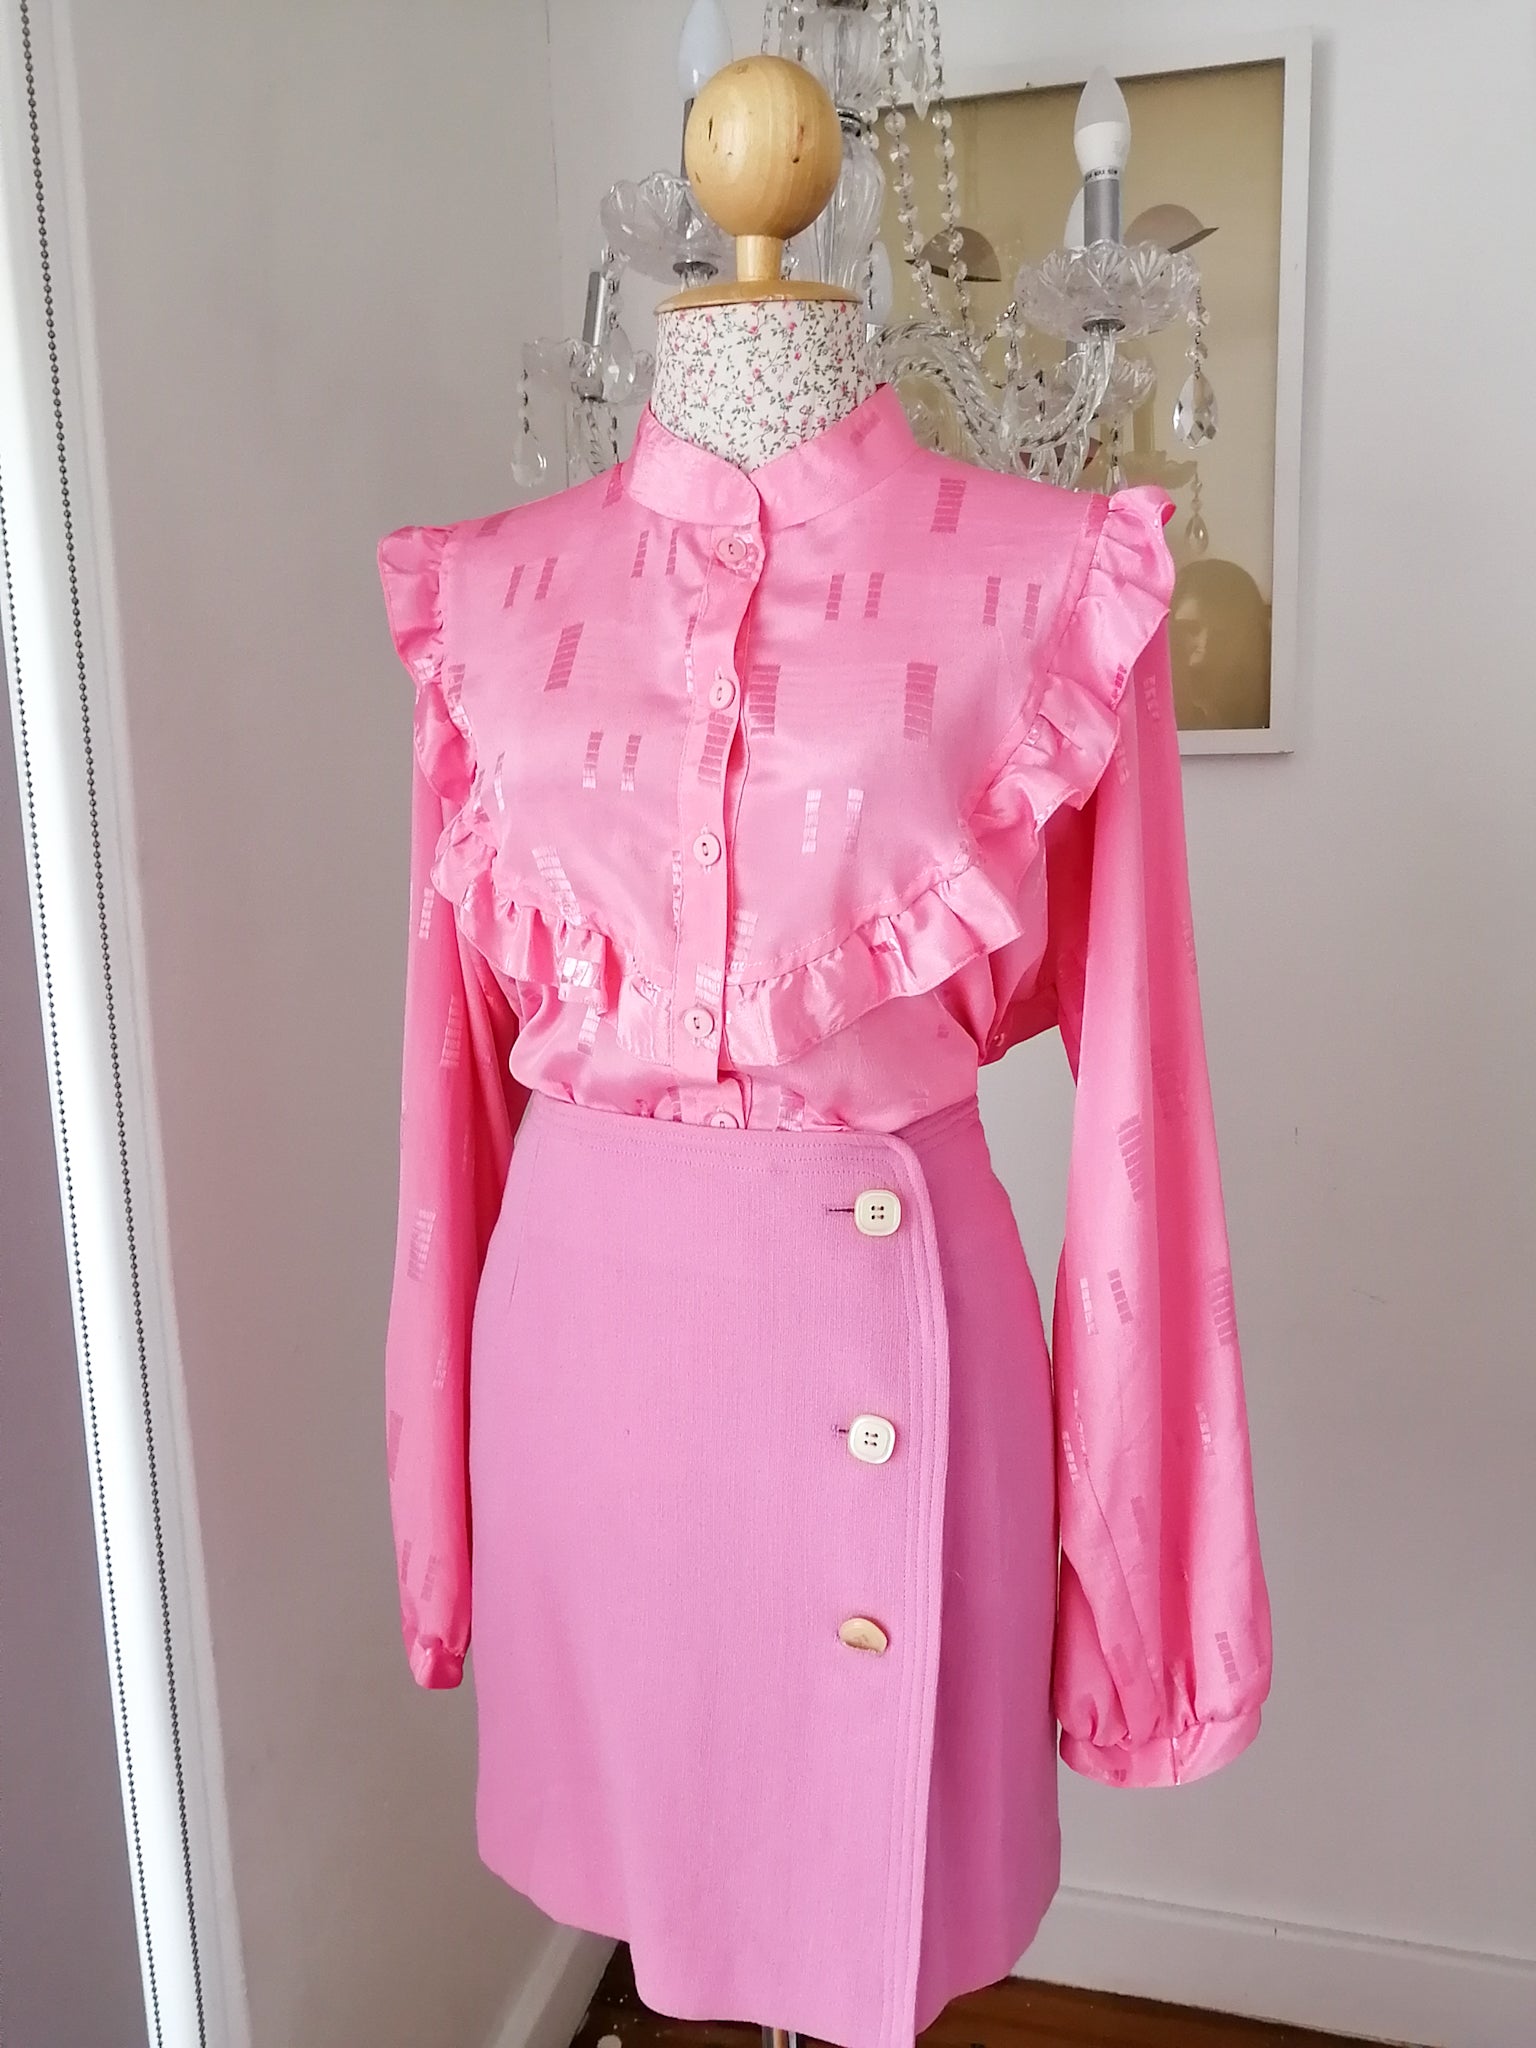 Bright pink frill blouse